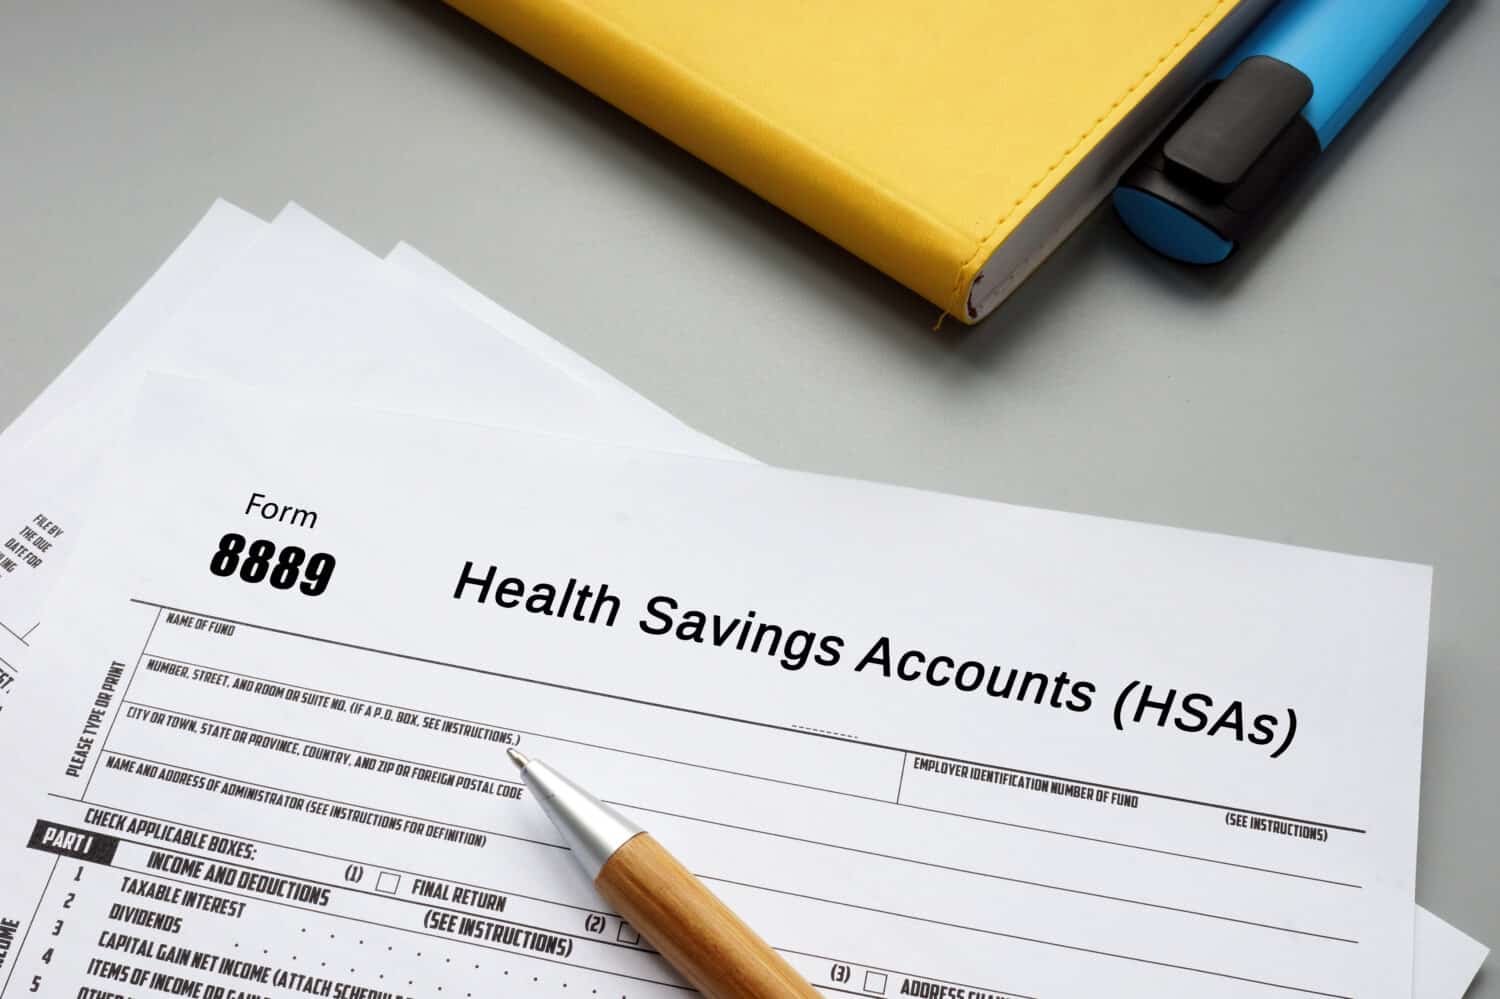 Financial concept meaning Form 8889 Health Savings Accounts (HSAs) with inscription on the sheet.